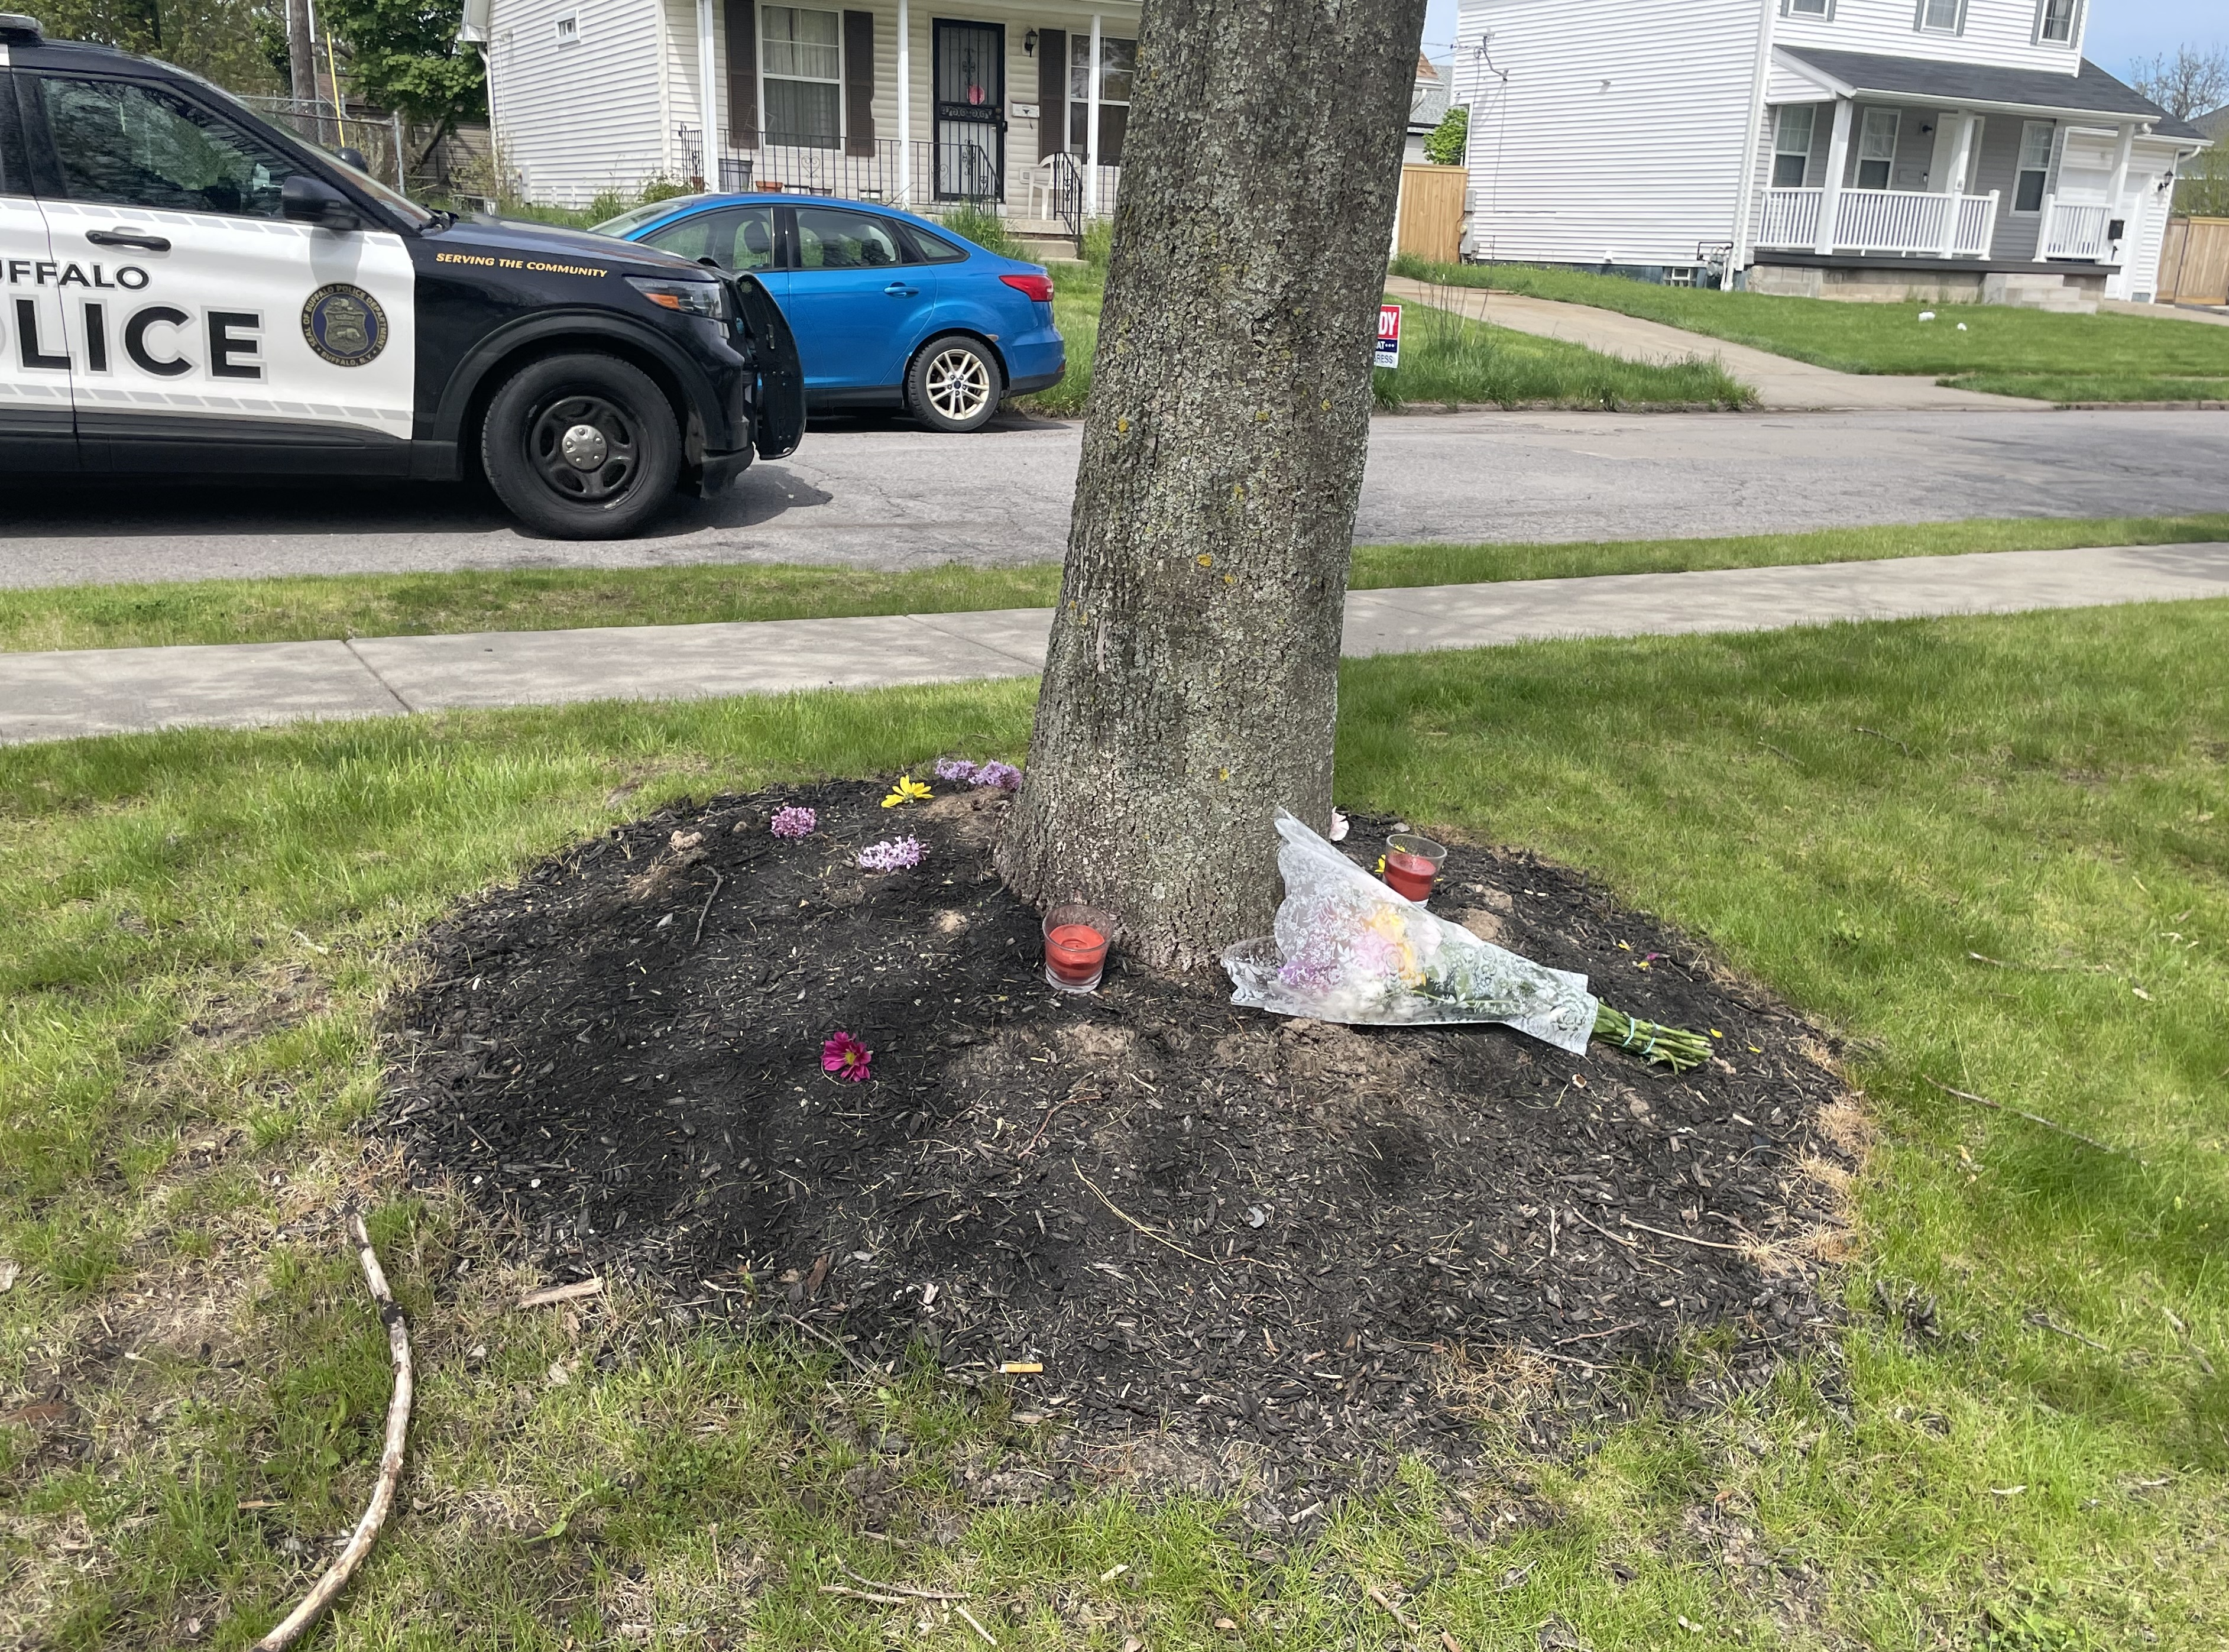 East Buffalo community activist Dr. Eva Doyle reacts to Saturday night's fatal shooting along Jefferson Avenue and what's next for the community